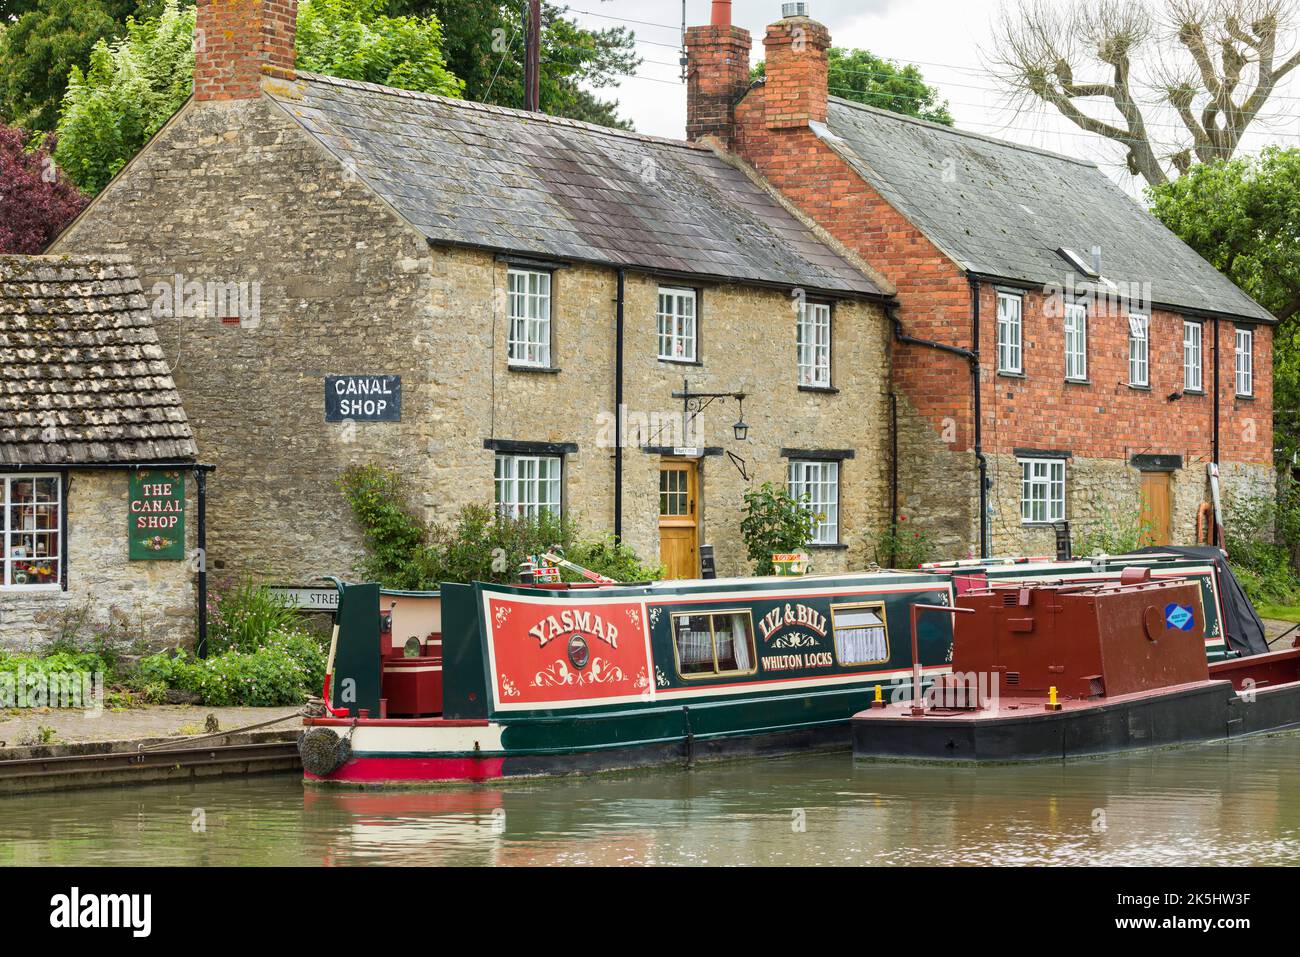 NORTHAMPTONSHIRE, UK - May 25, 2022. Narrowboats and canal shop at Stoke Bruerne, a historic village on the Grand Union Canal Stock Photo